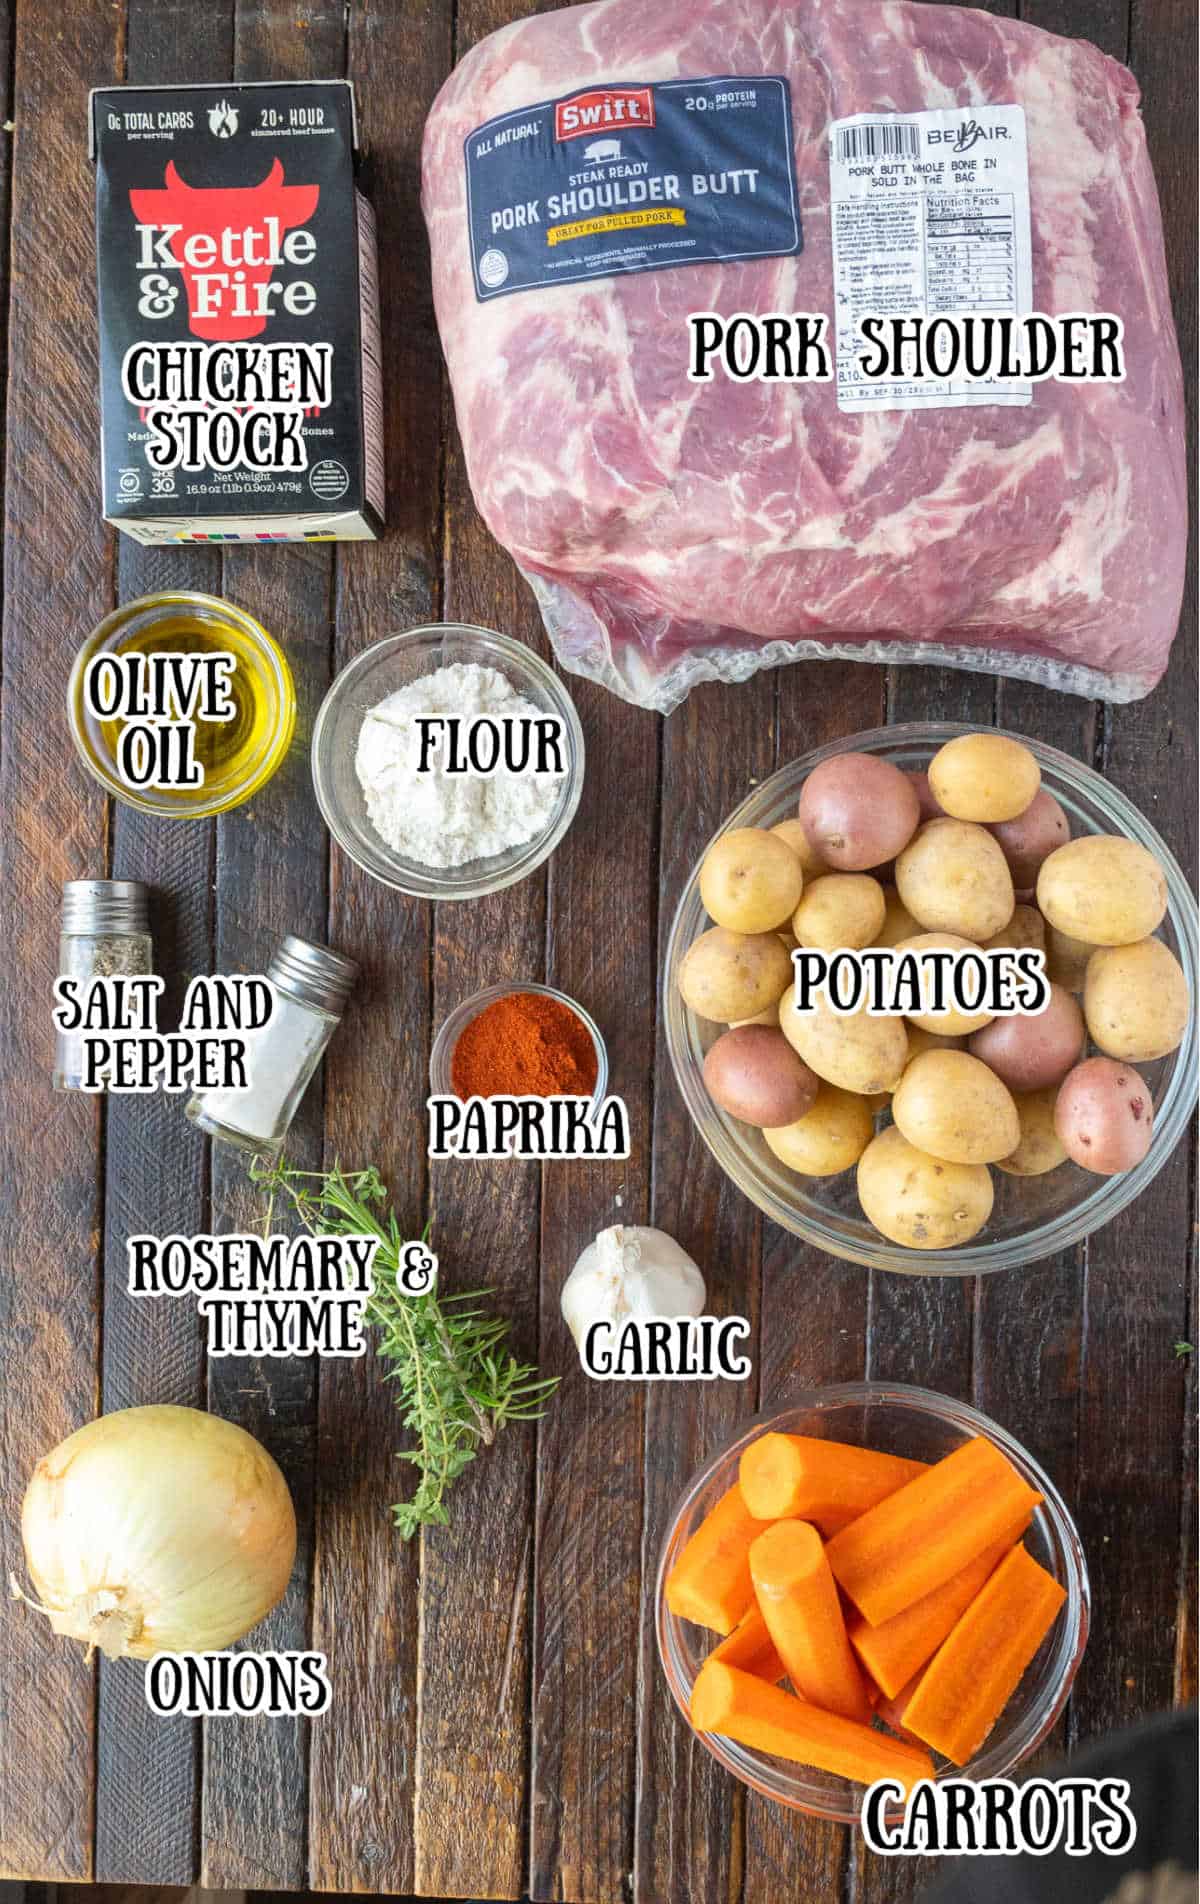 All the ingredients needed for this roasted pork shoulder.